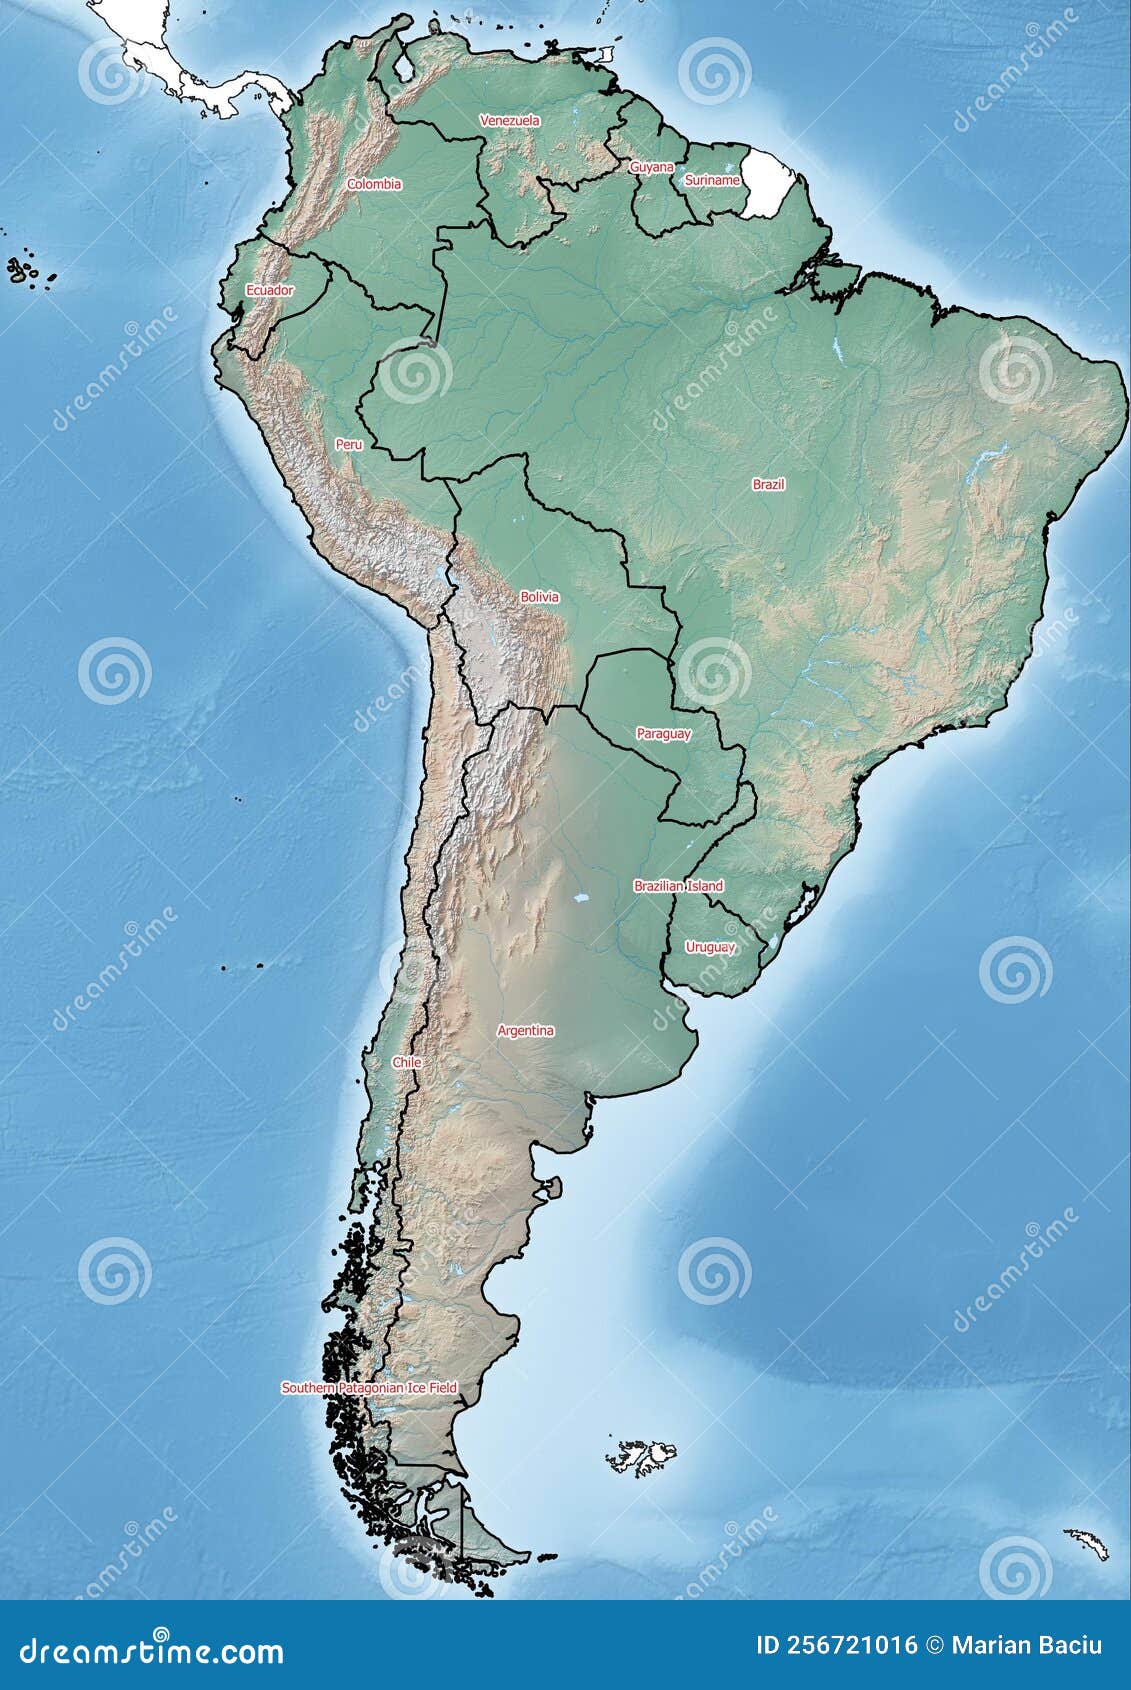 The Continent Of South America Illustration With Countries Countries